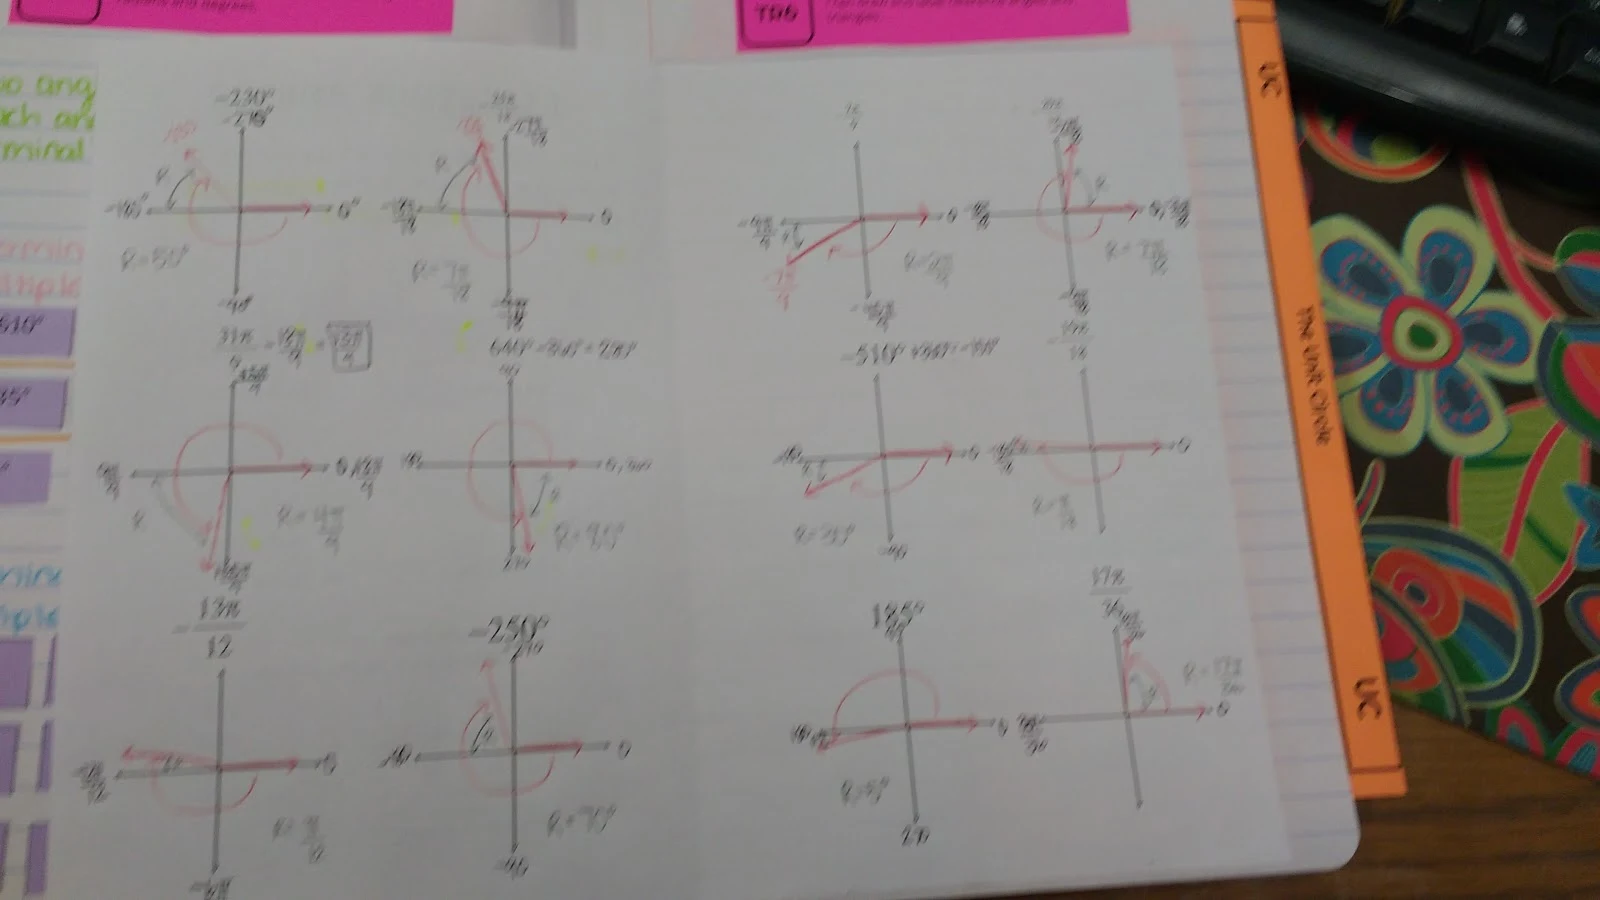 Reference Angles Foldable